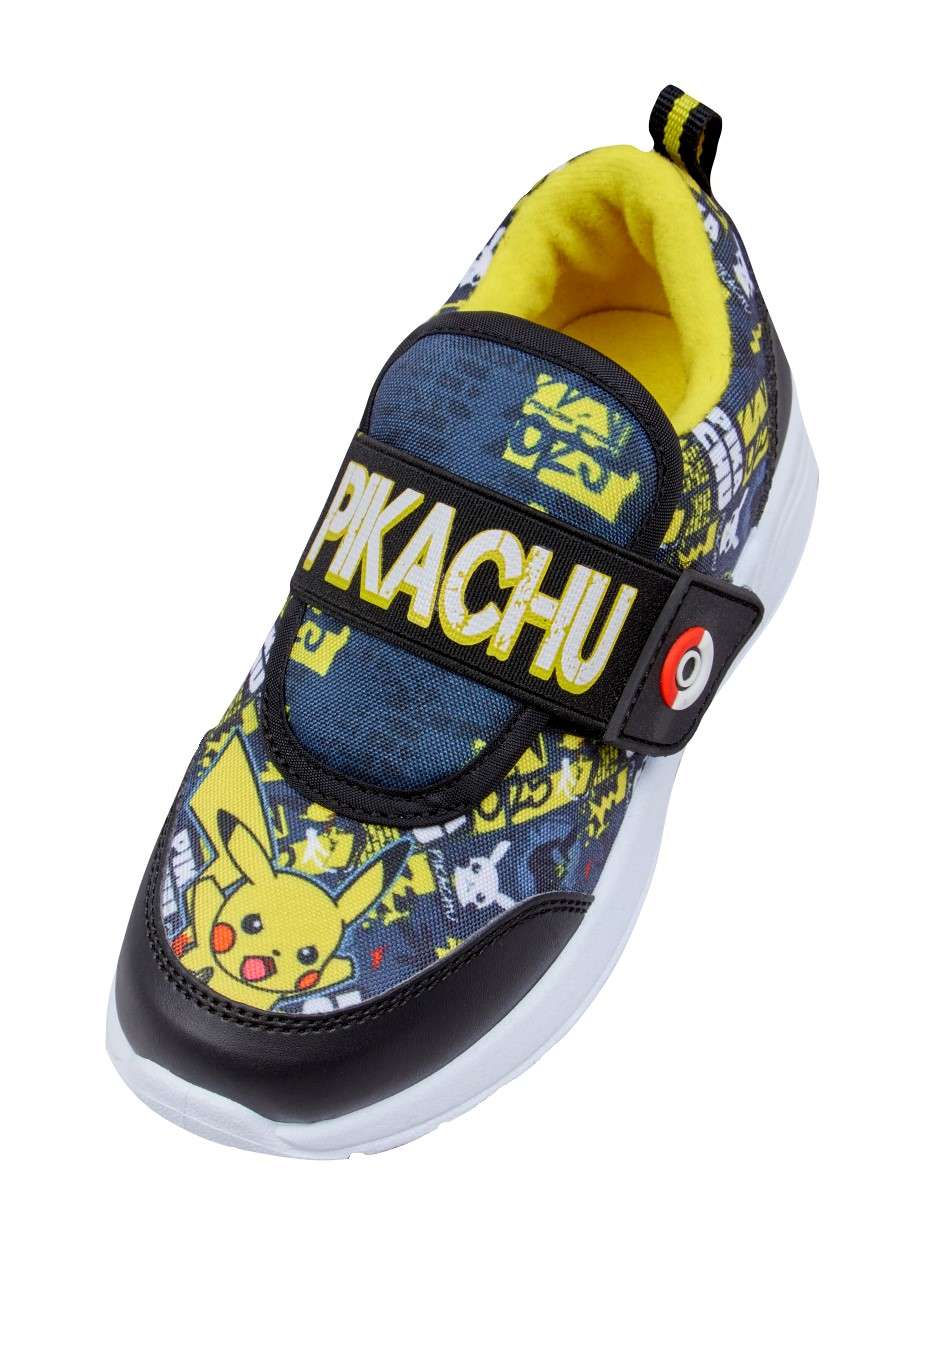 Pokémon Boys Black and Yellow Easy Close Trainers